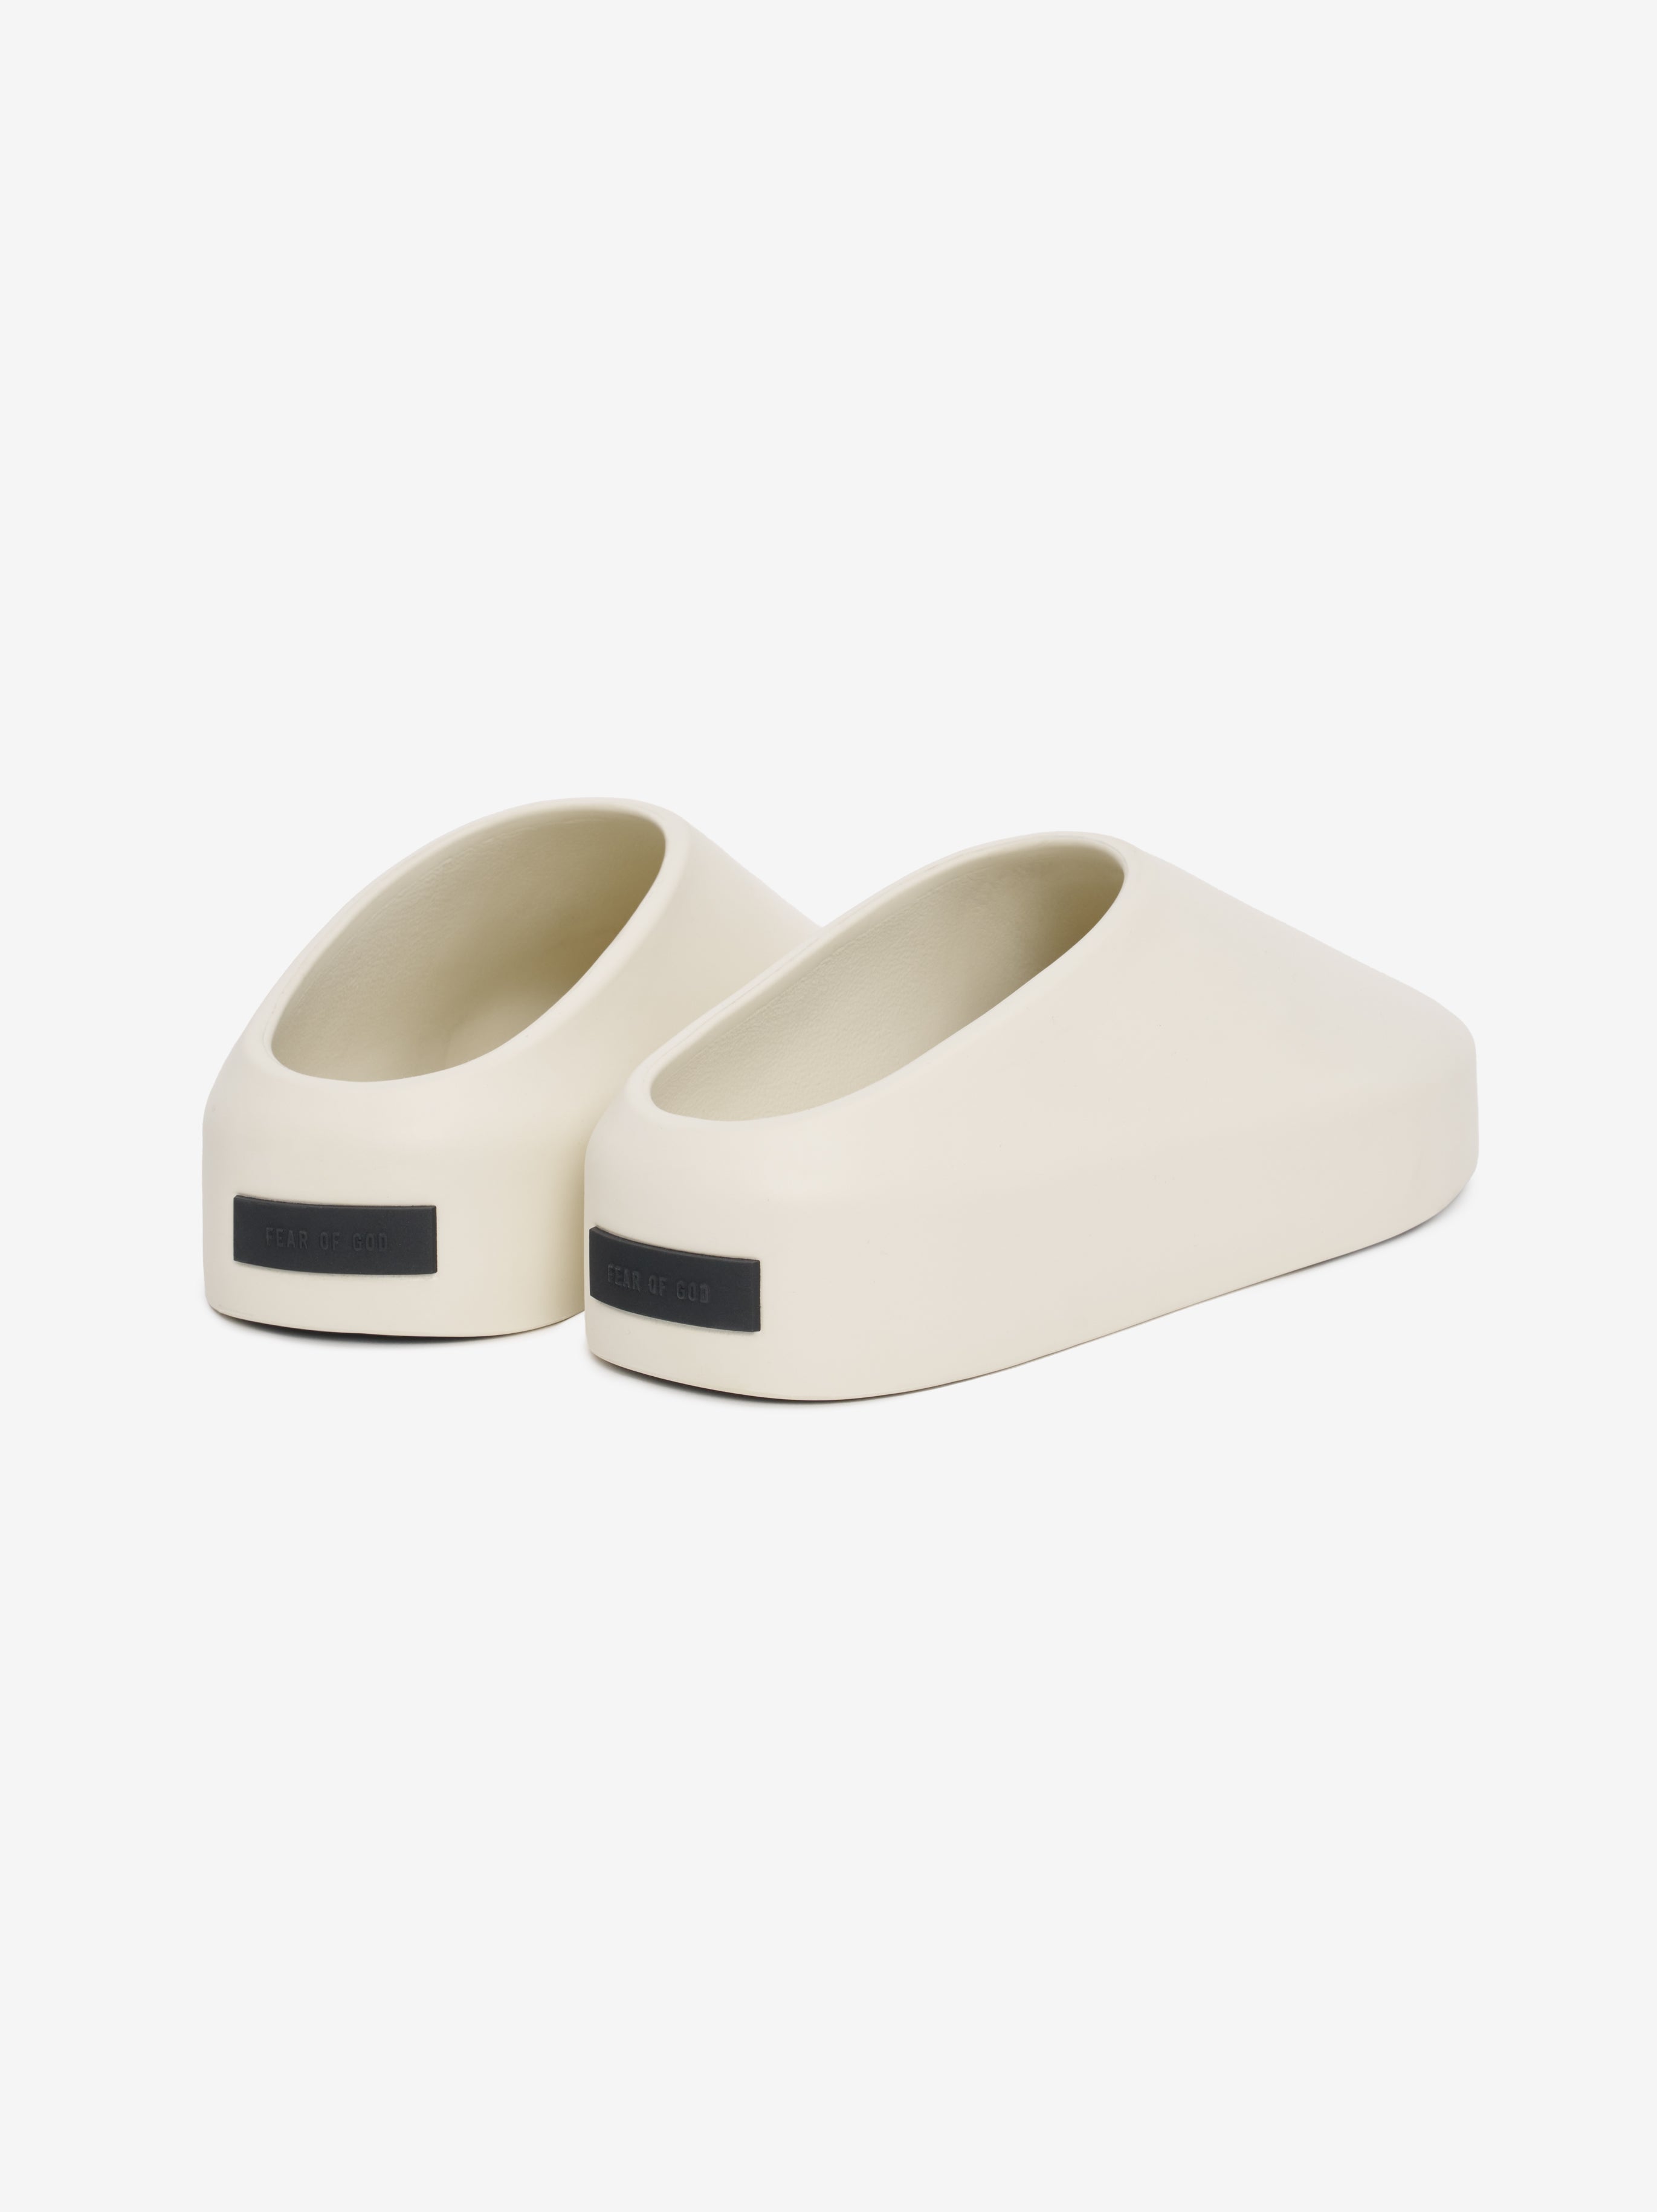 The California Collection 8 - Slip On Shoes | Fear Of God | Fear 